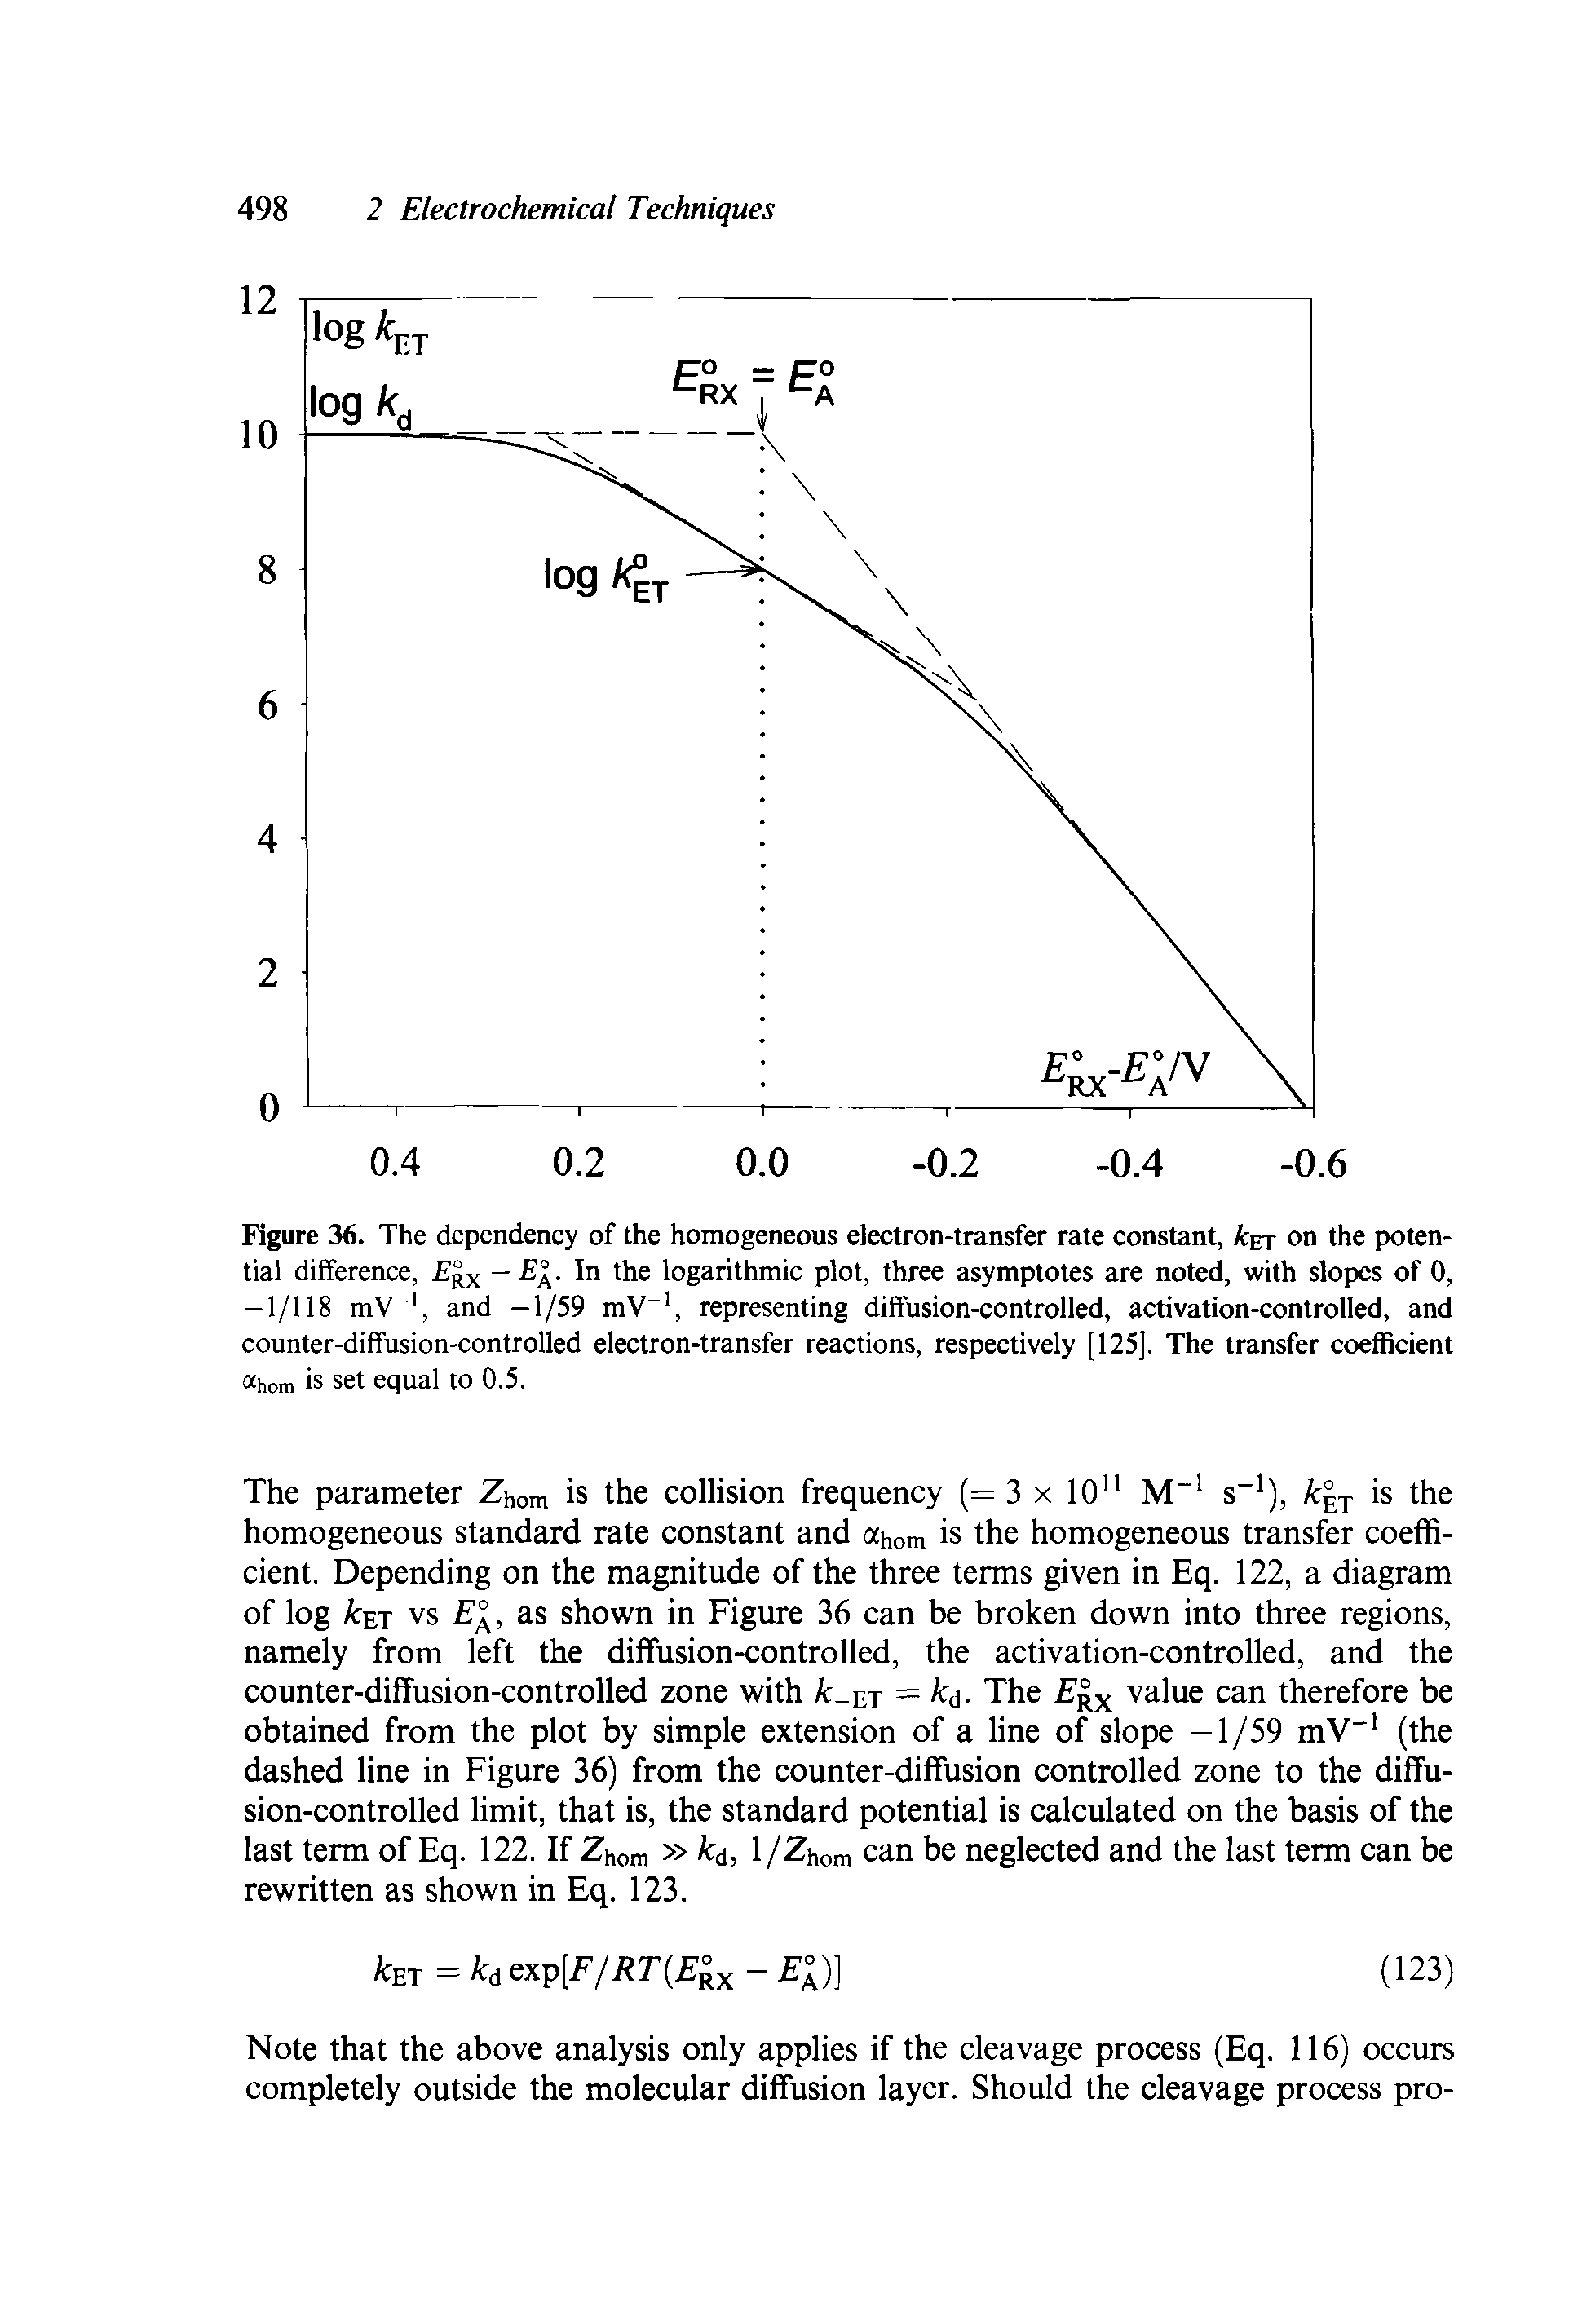 Figure 36. The dependency of the homogeneous electron-transfer rate constant, A et on the potential difference, Erx - a- In the logarithmic plot, three asymptotes are noted, with slopes of 0, -1/118 mV, and -1/59 mV , representing diffusion-controlled, activation-controlled, and counter-diflfusion-controlled electron-transfer reactions, respectively [125]. The transfer coefficient...